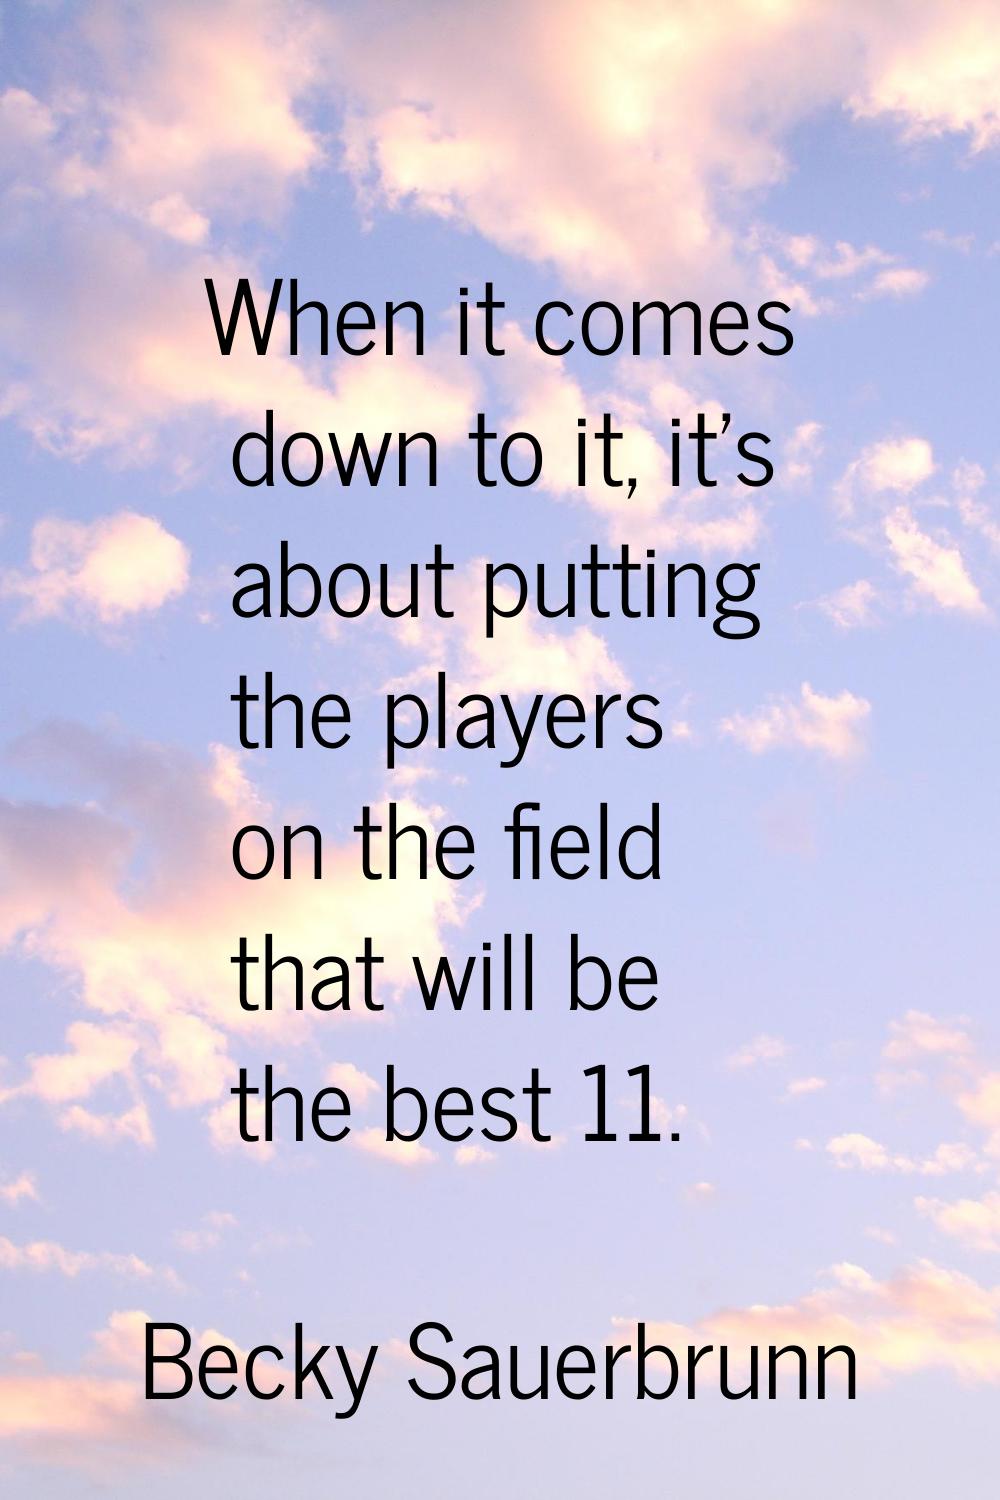 When it comes down to it, it's about putting the players on the field that will be the best 11.